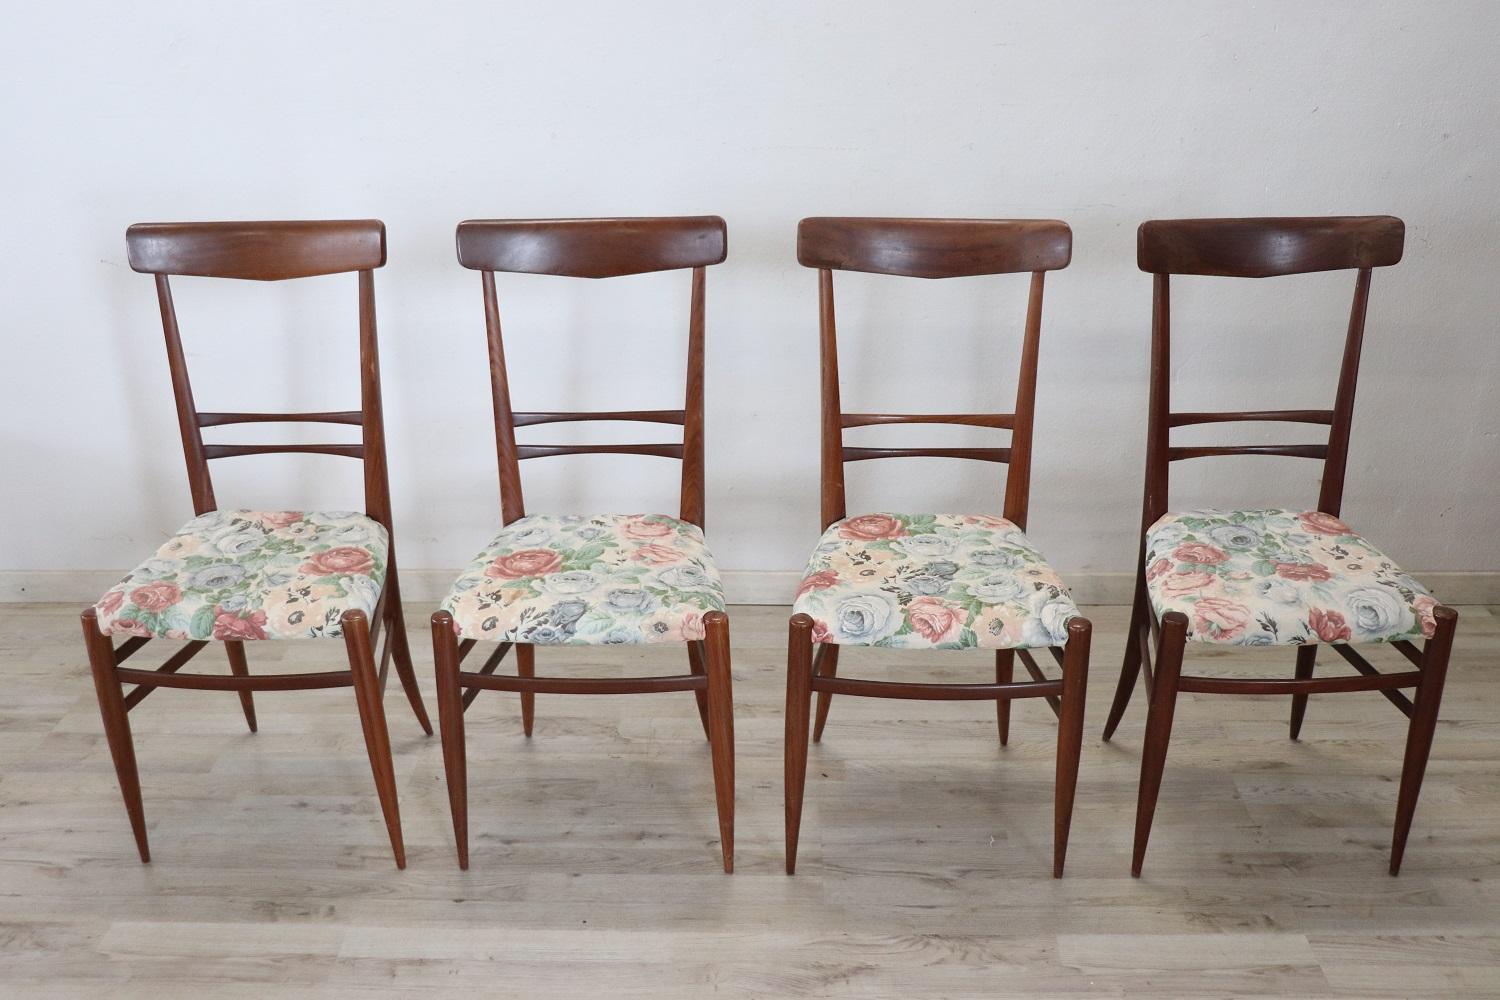 Set of four teak chairs 1950s. These beautiful Italian design chairs are in the style of Ico Parisi. No brand or signature present. Good general condition, there are some old restorations in the back of some chairs. See photos.